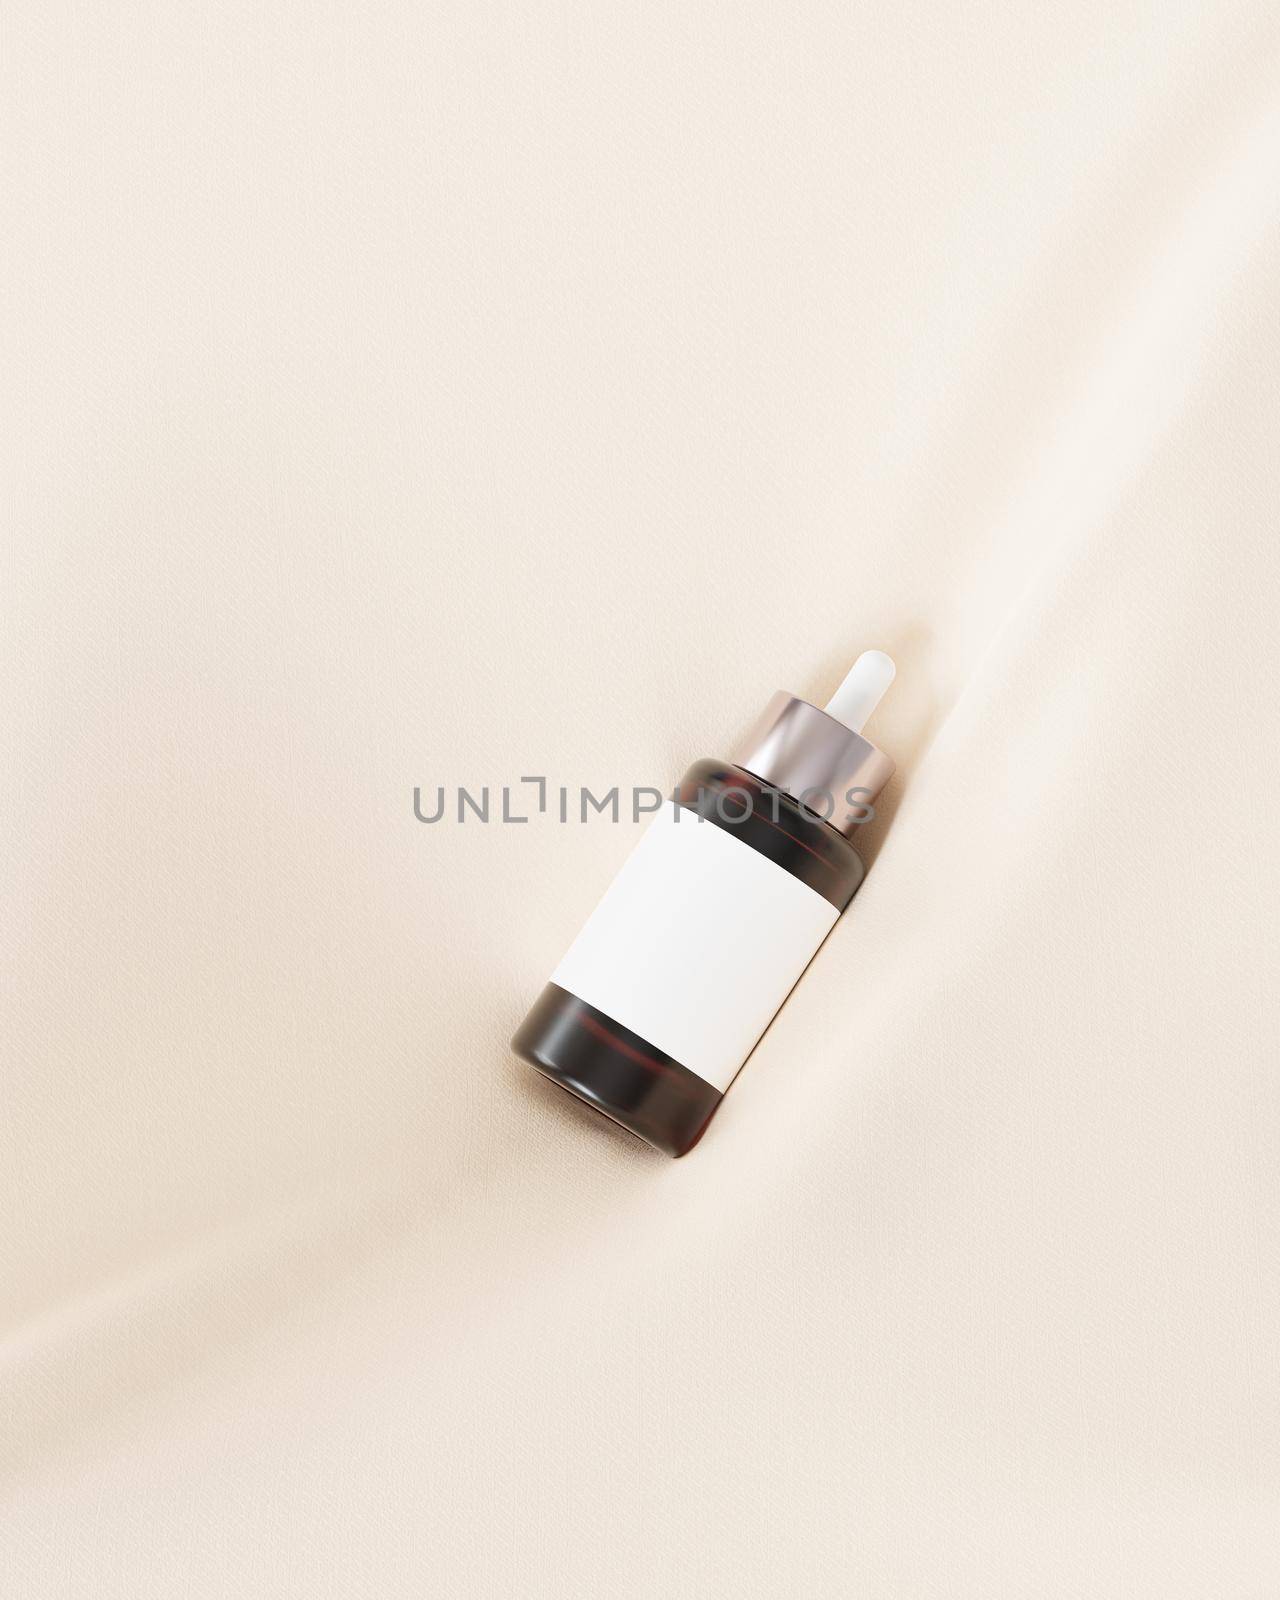 Mockup glass dropper bottle for cosmetics, care products or advertising, on beige linen cloth. 3d illustration render by Frostroomhead